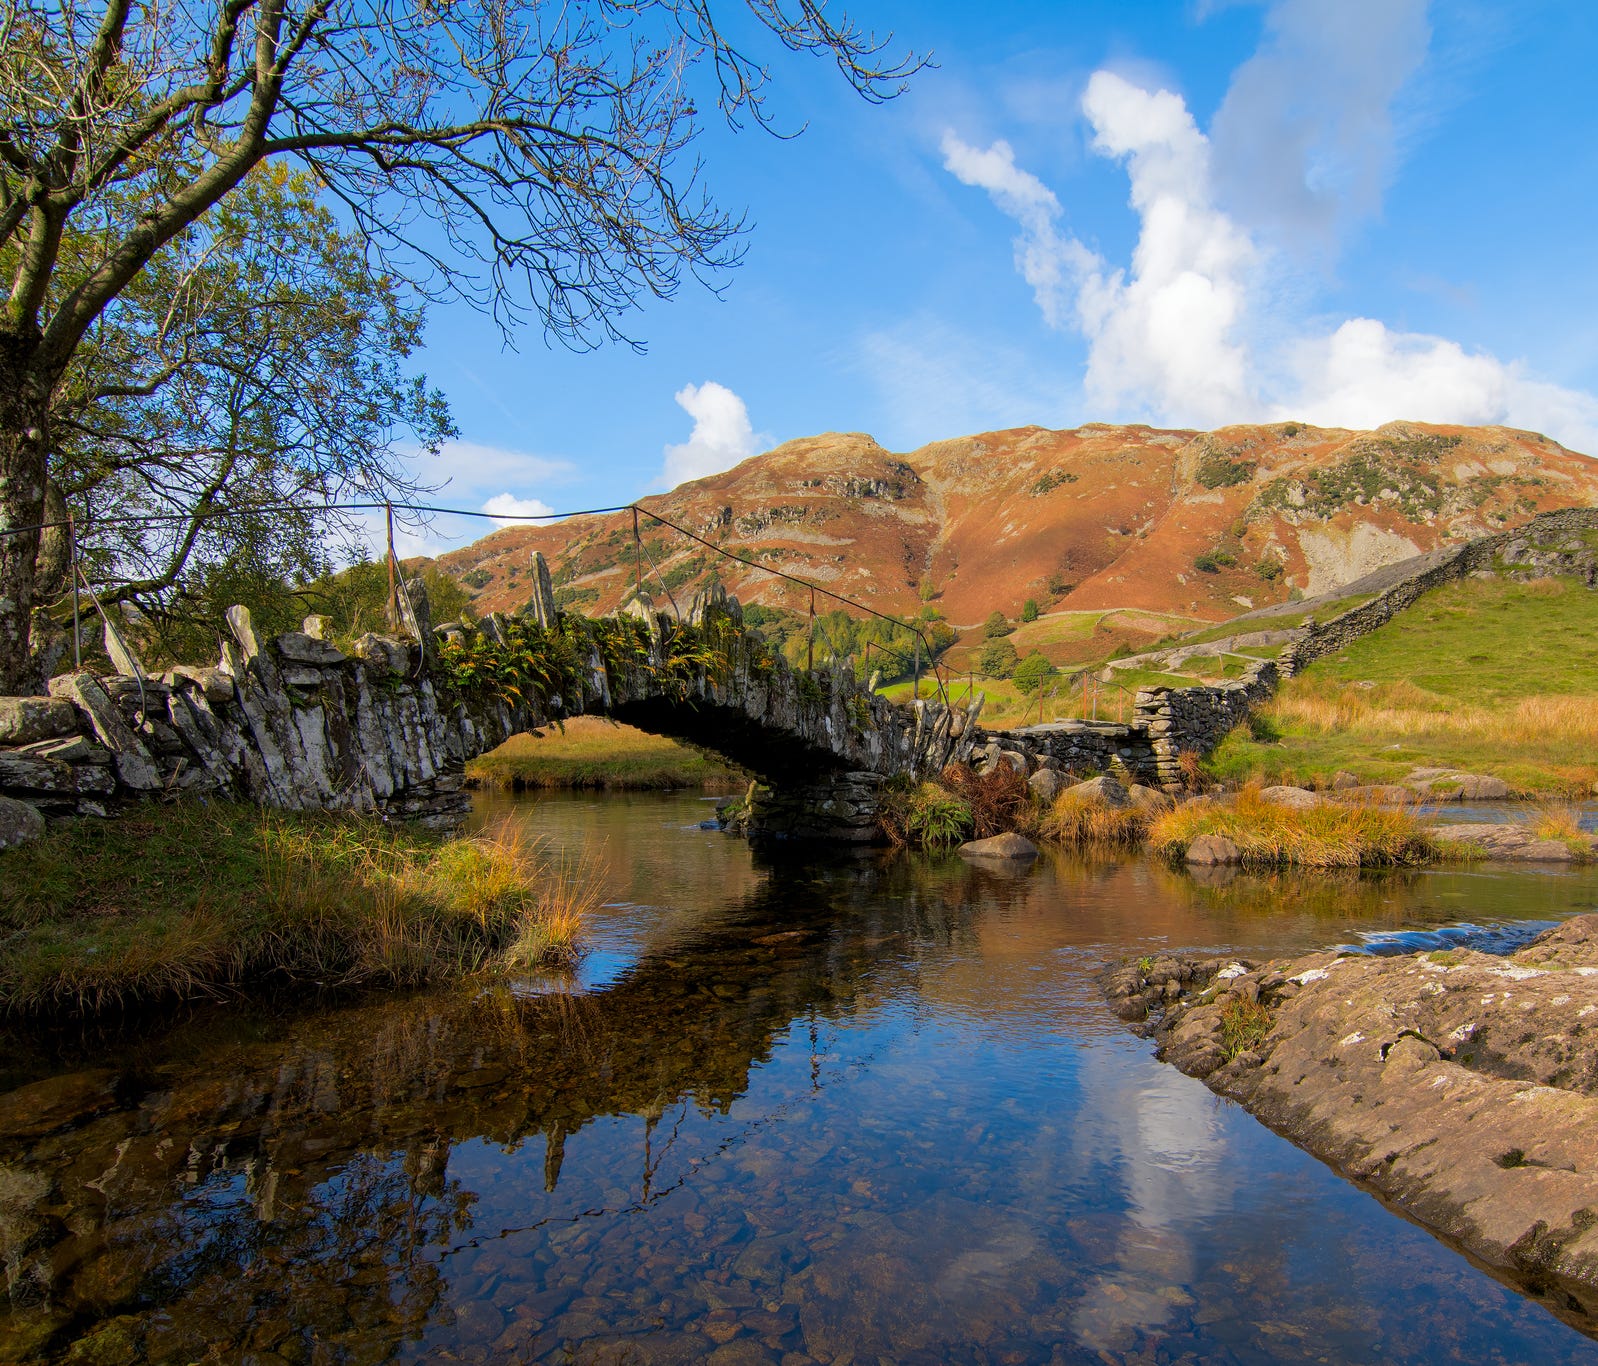 The English Lake District, United Kingdom: Experience the true English countryside at one of the new UNESCO World Heritage sites in Europe. Not visited by many tourists, the northwest section of England is full of valleys, mountains and, of course, l